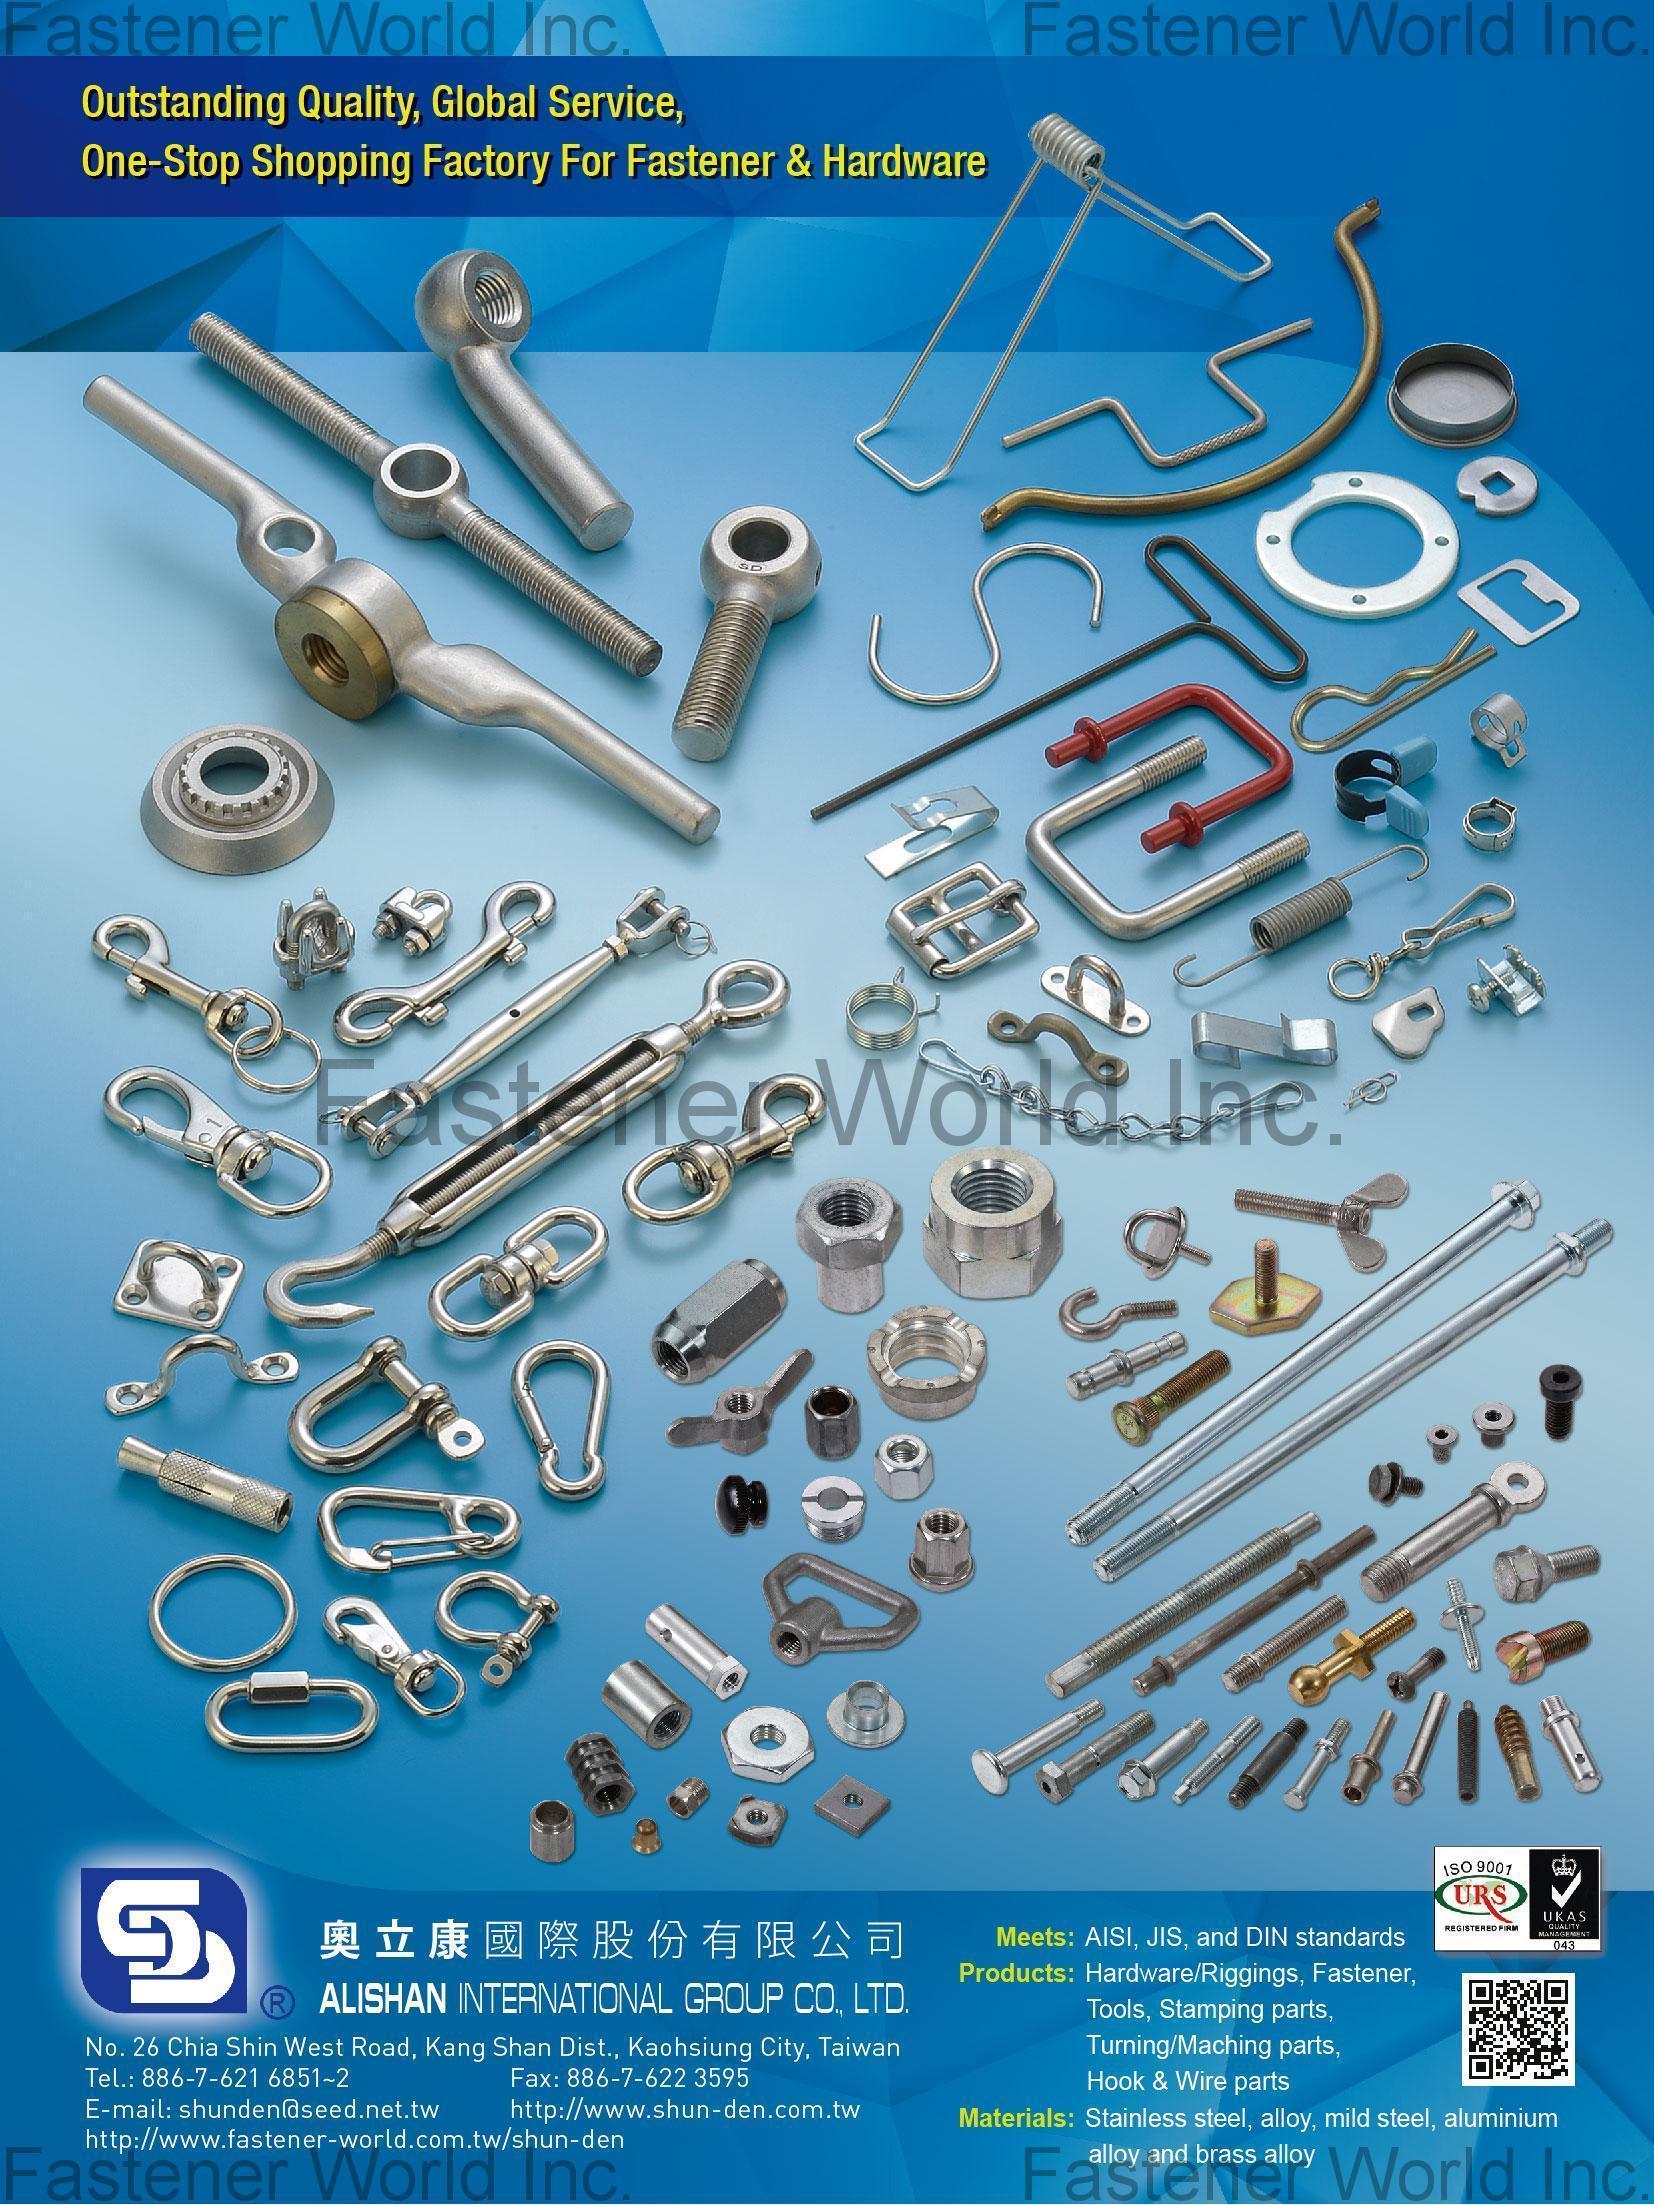 Bit & Bits Sets,All Kinds Of Nuts,All Kinds of Screws,Roller / Chains,Turning Parts,Stamped Parts